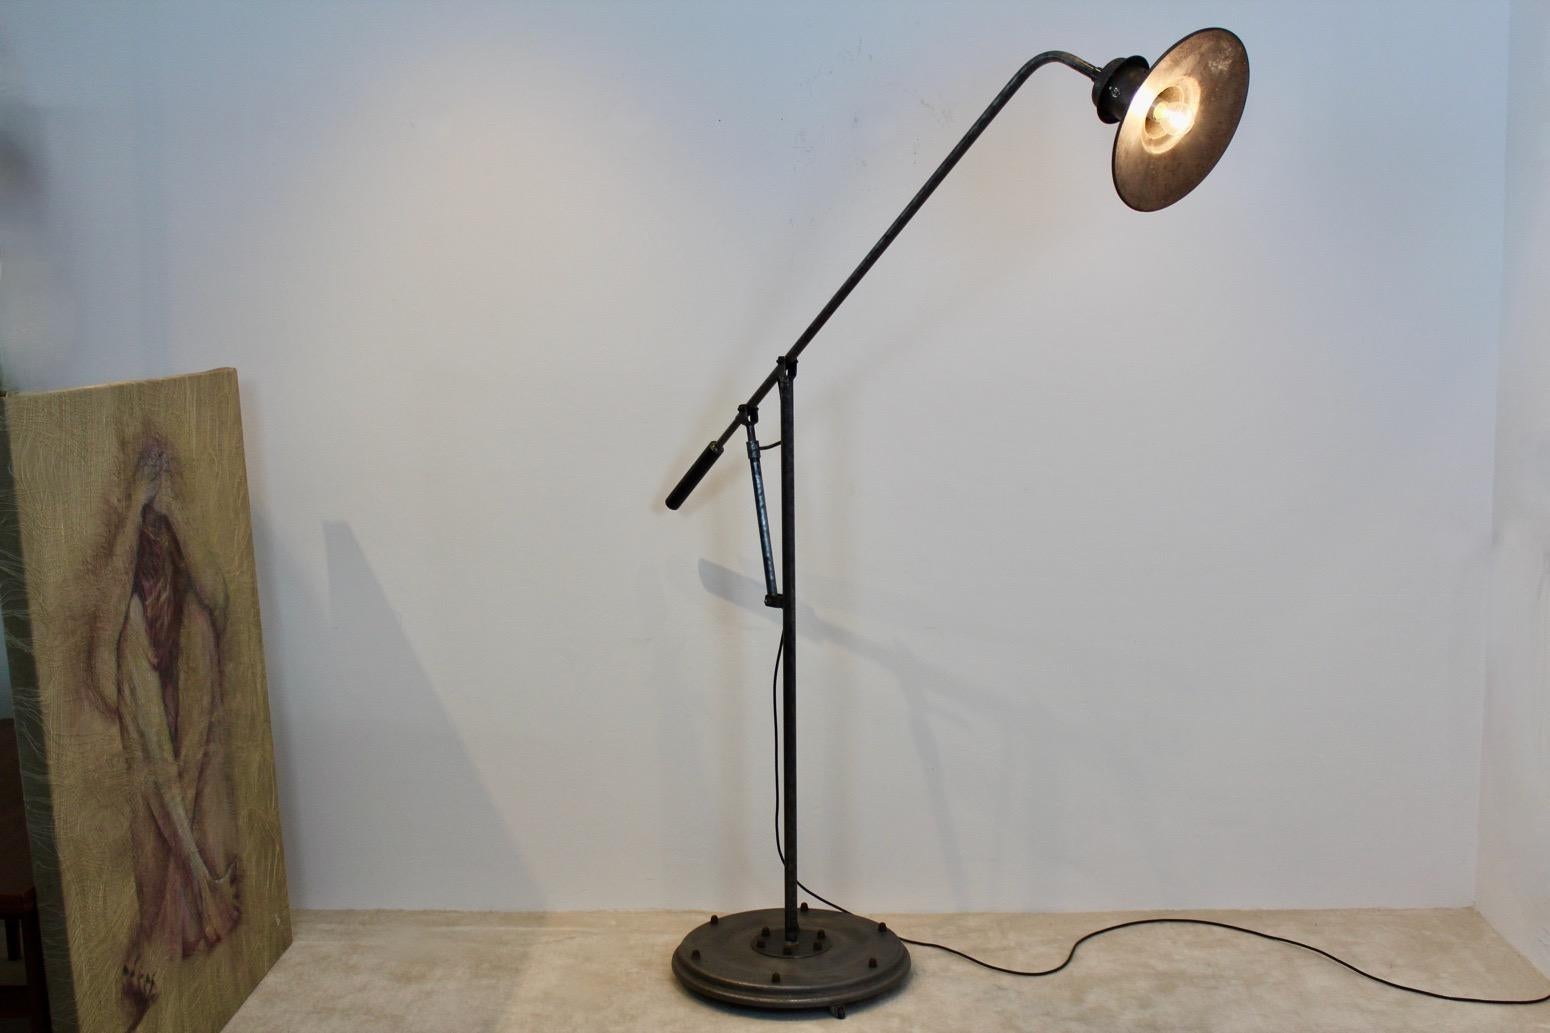 Beautiful Industrial lamp with raw charisma and beautiful details. This unique light consists of a totally steel shade, frame and solid base. The base is on efficient wheels, the lamp is partly adjustable in height (110-210) with an 'arm'. Unique